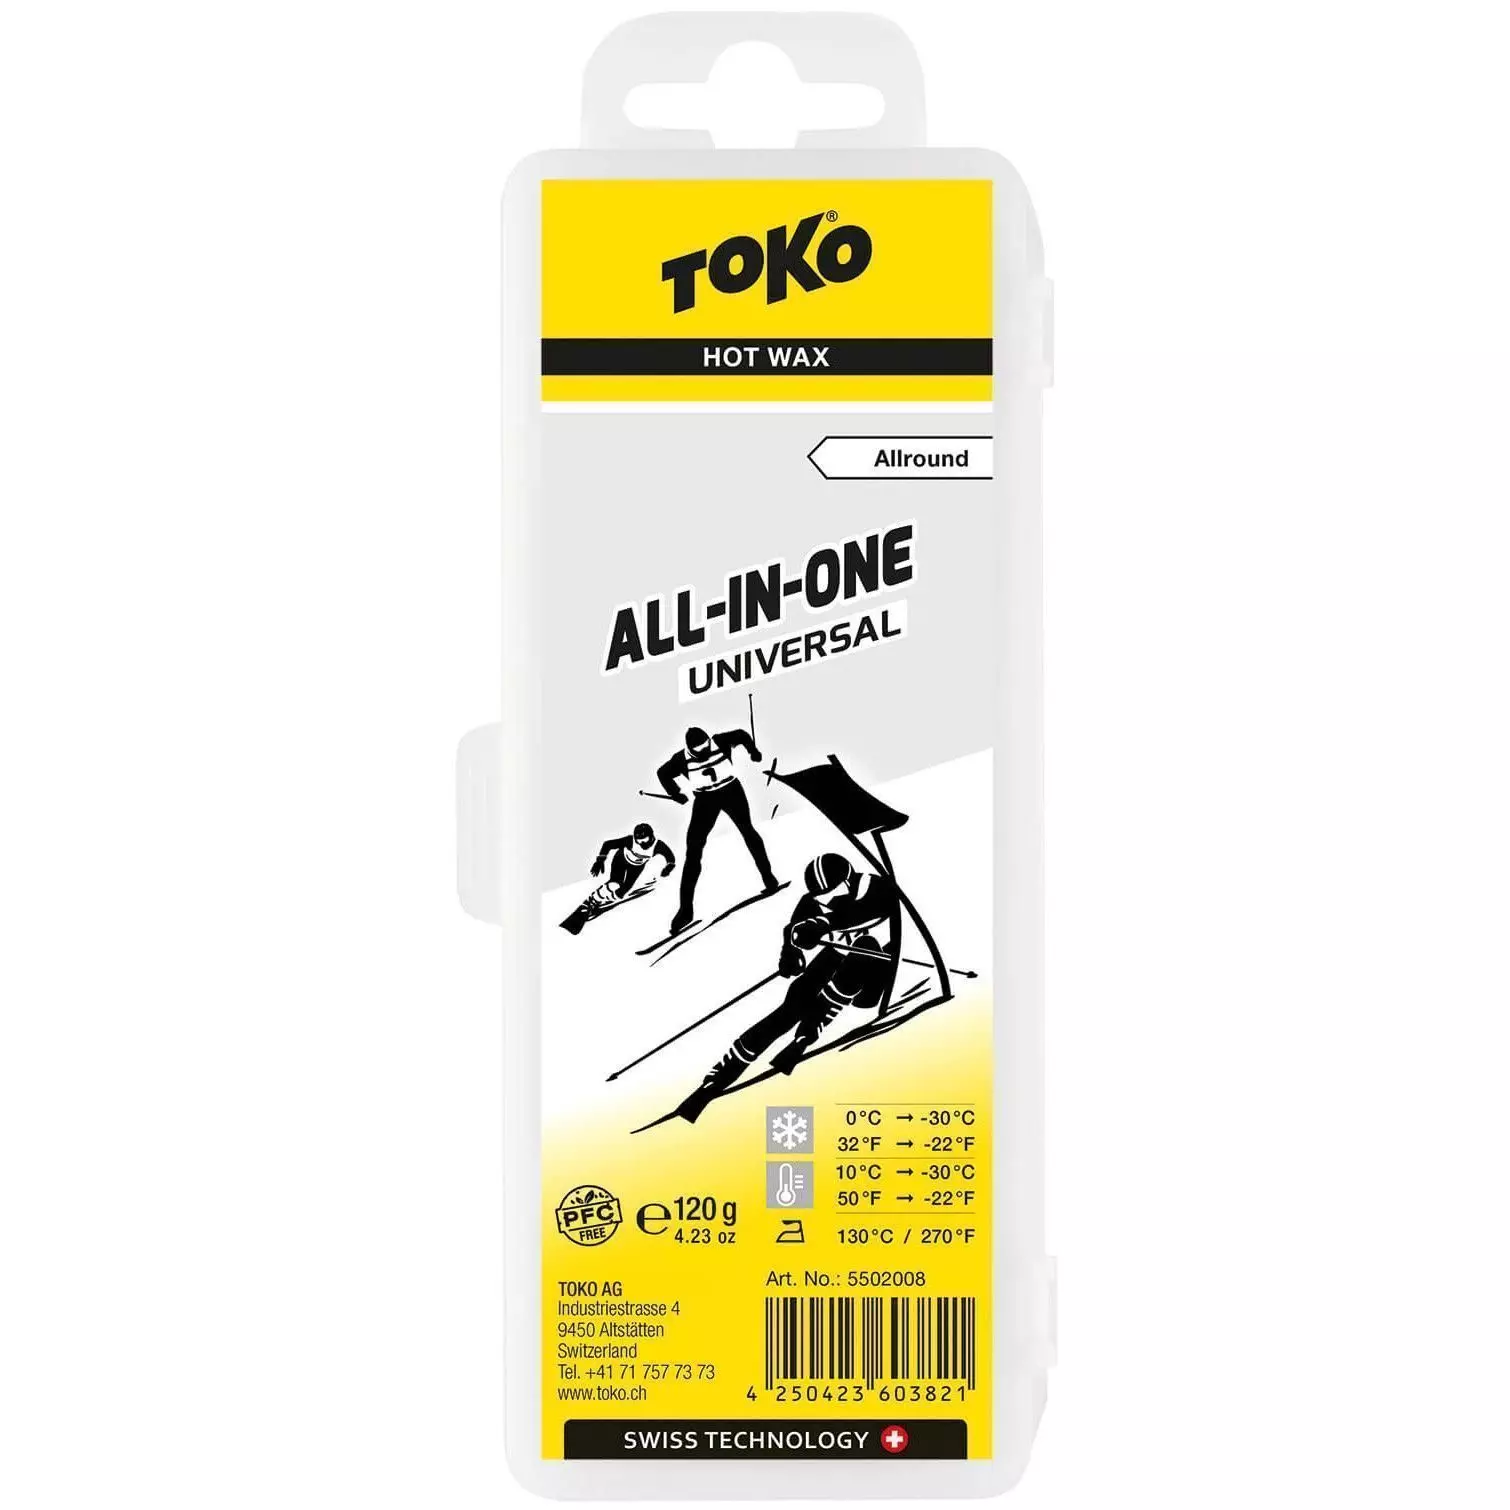 Toko Cere Nonfluoro All-in-one 120g